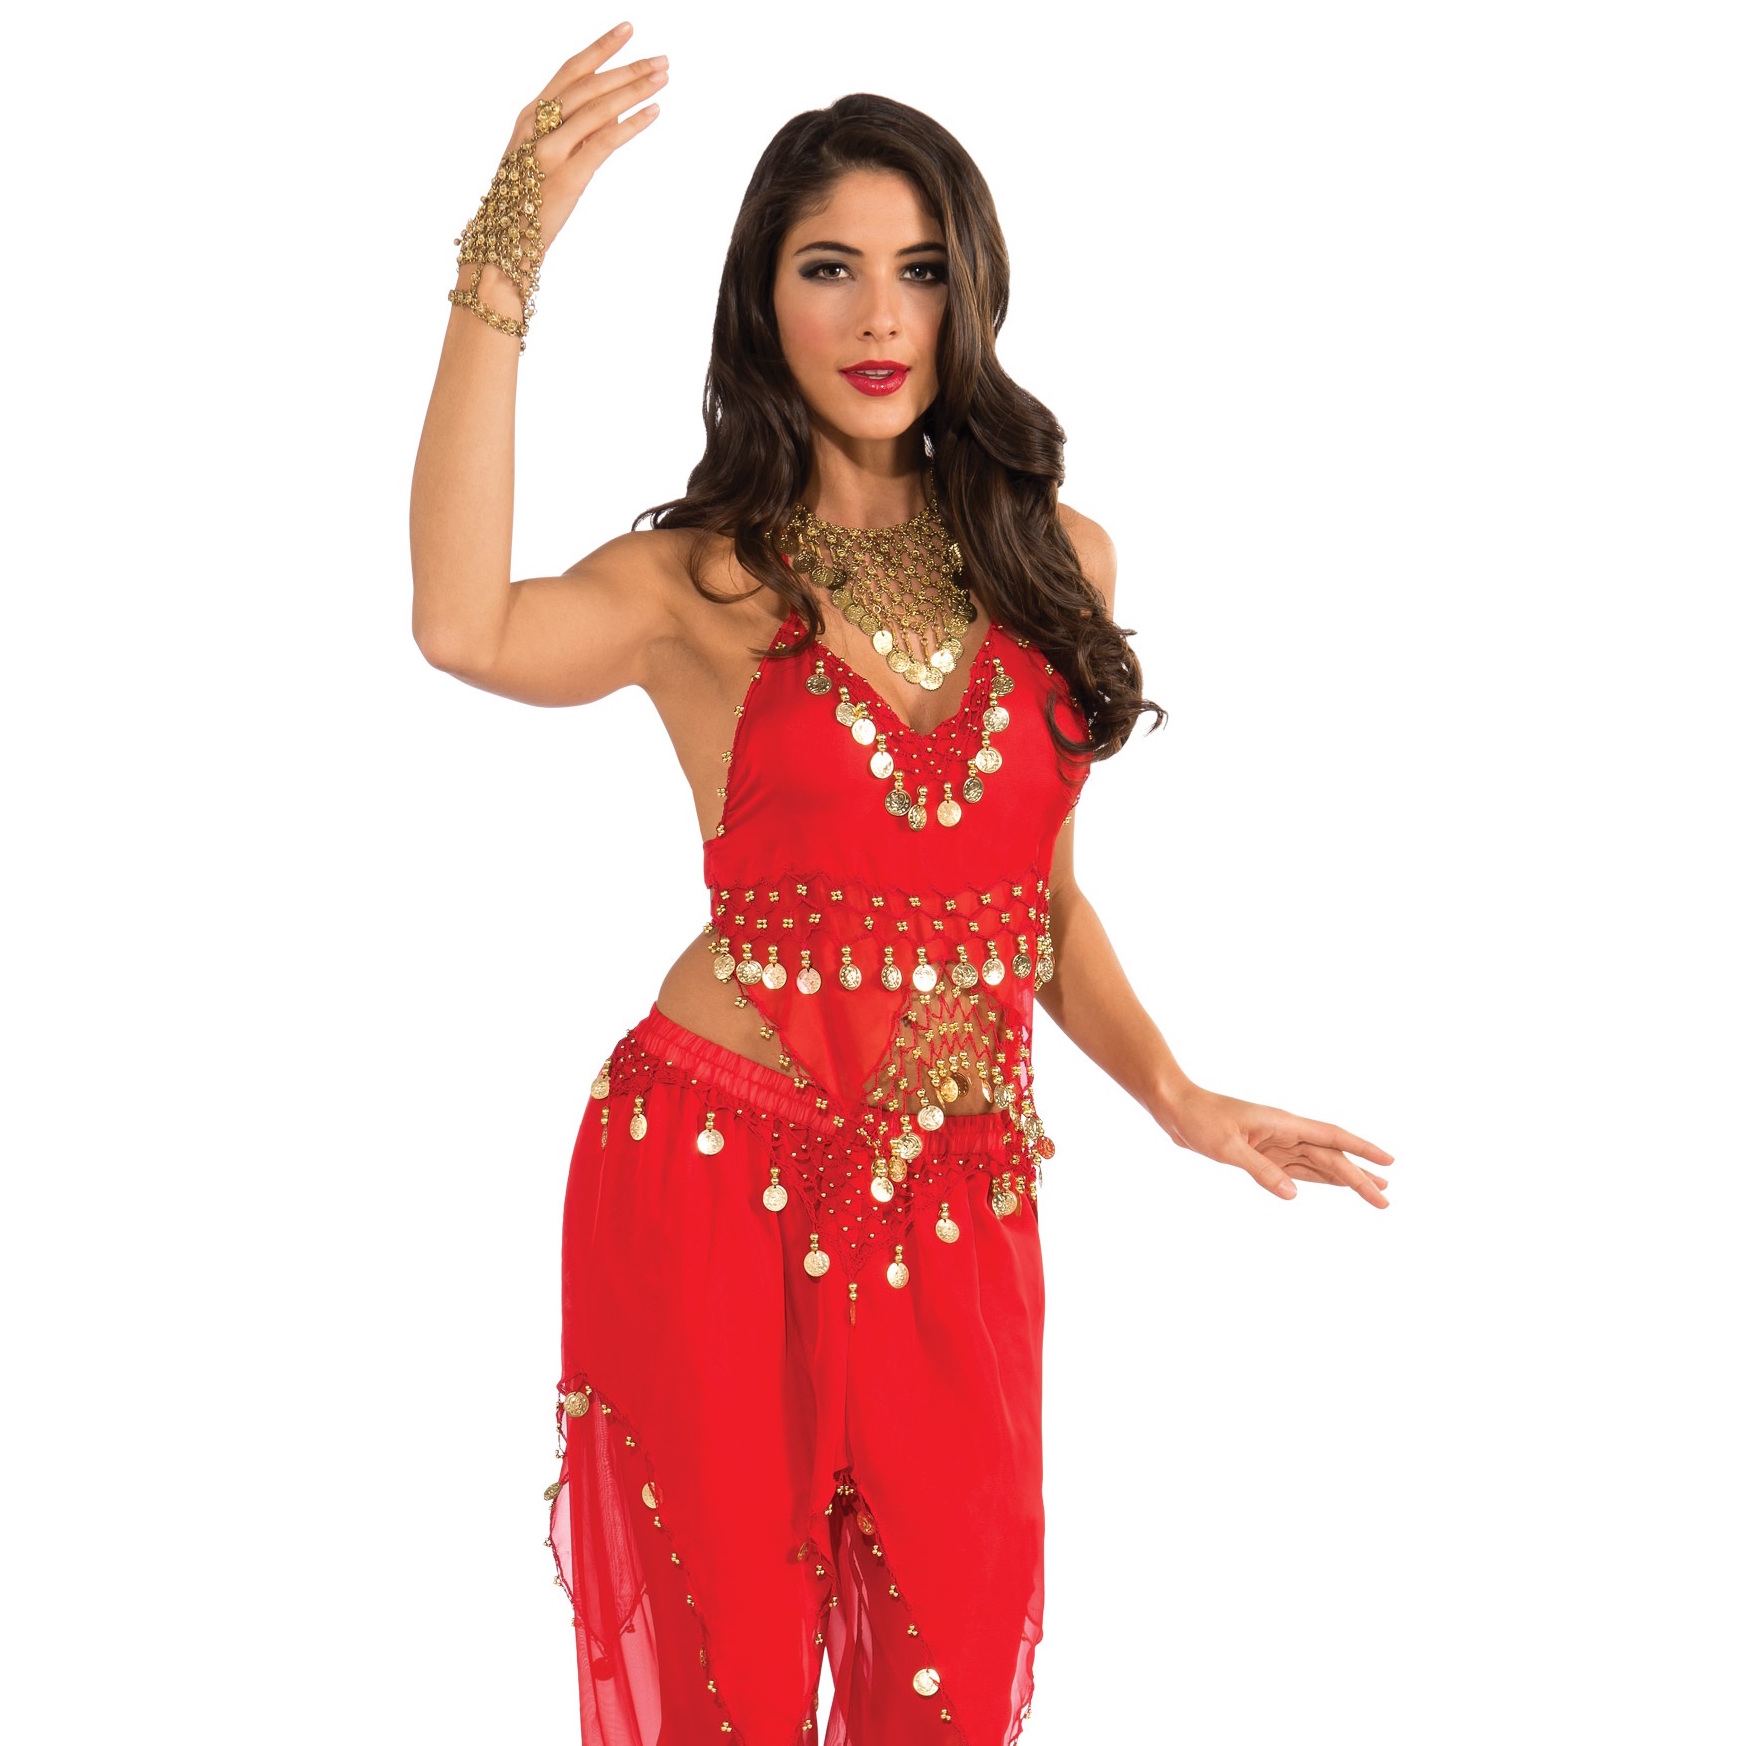 Best Belly Dancing Classes Near Me And You